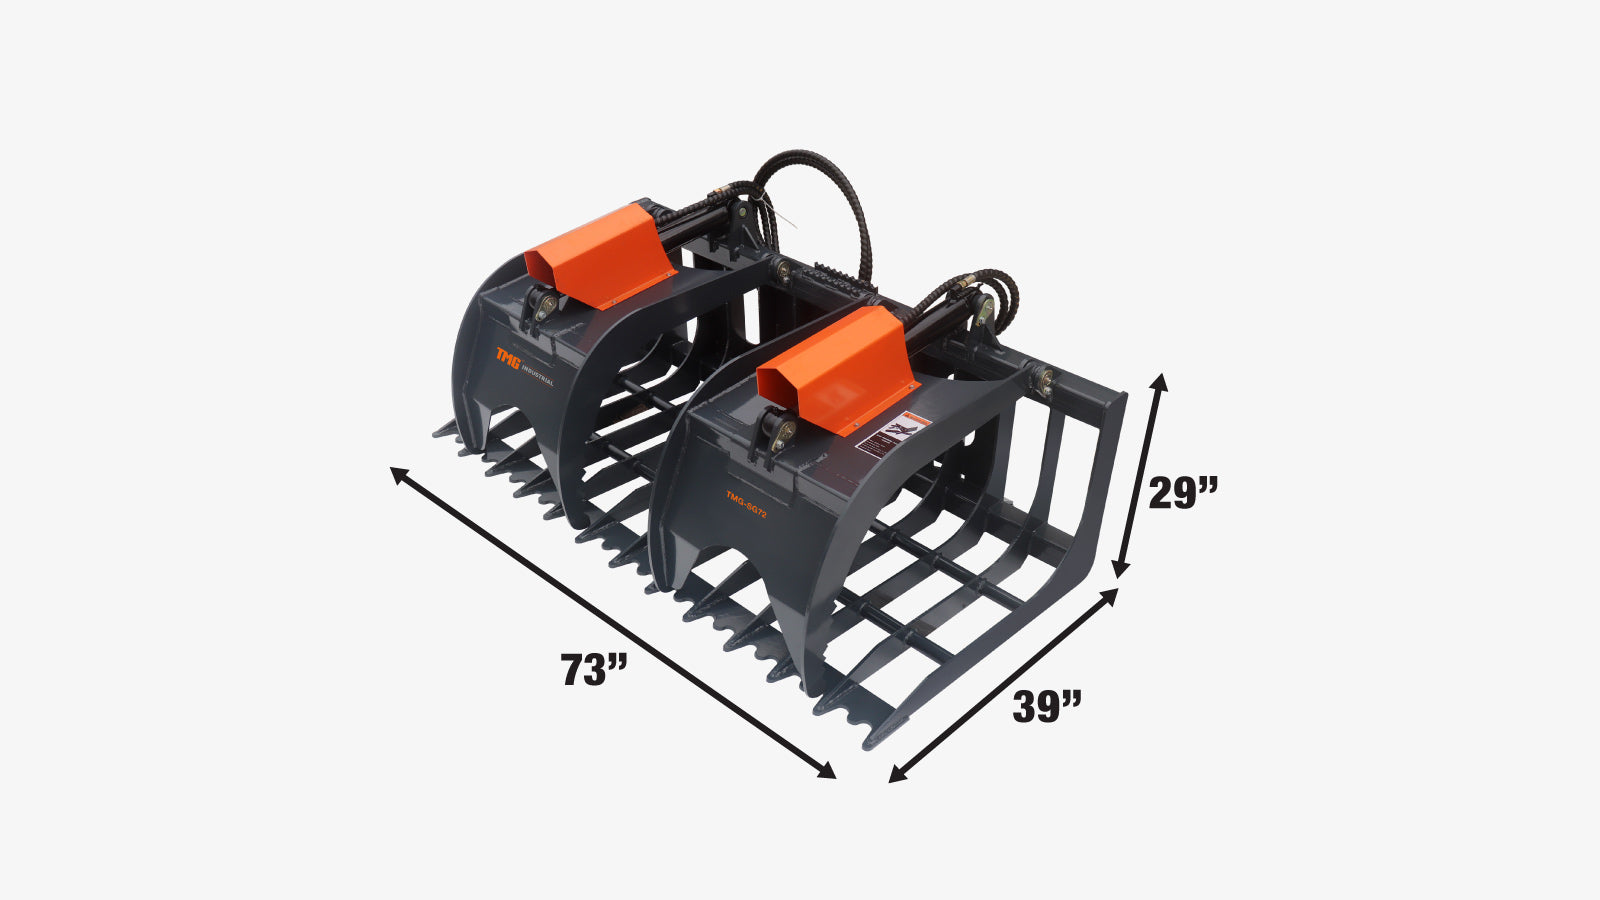 TMG Industrial 72” Skid Steer Rock Skeleton Grapple Attachment, Universal Mount, 36” Arm Opening, 6” Tine Spacing, 2500 lb Weight Capacity, TMG-SG72-specifications-image